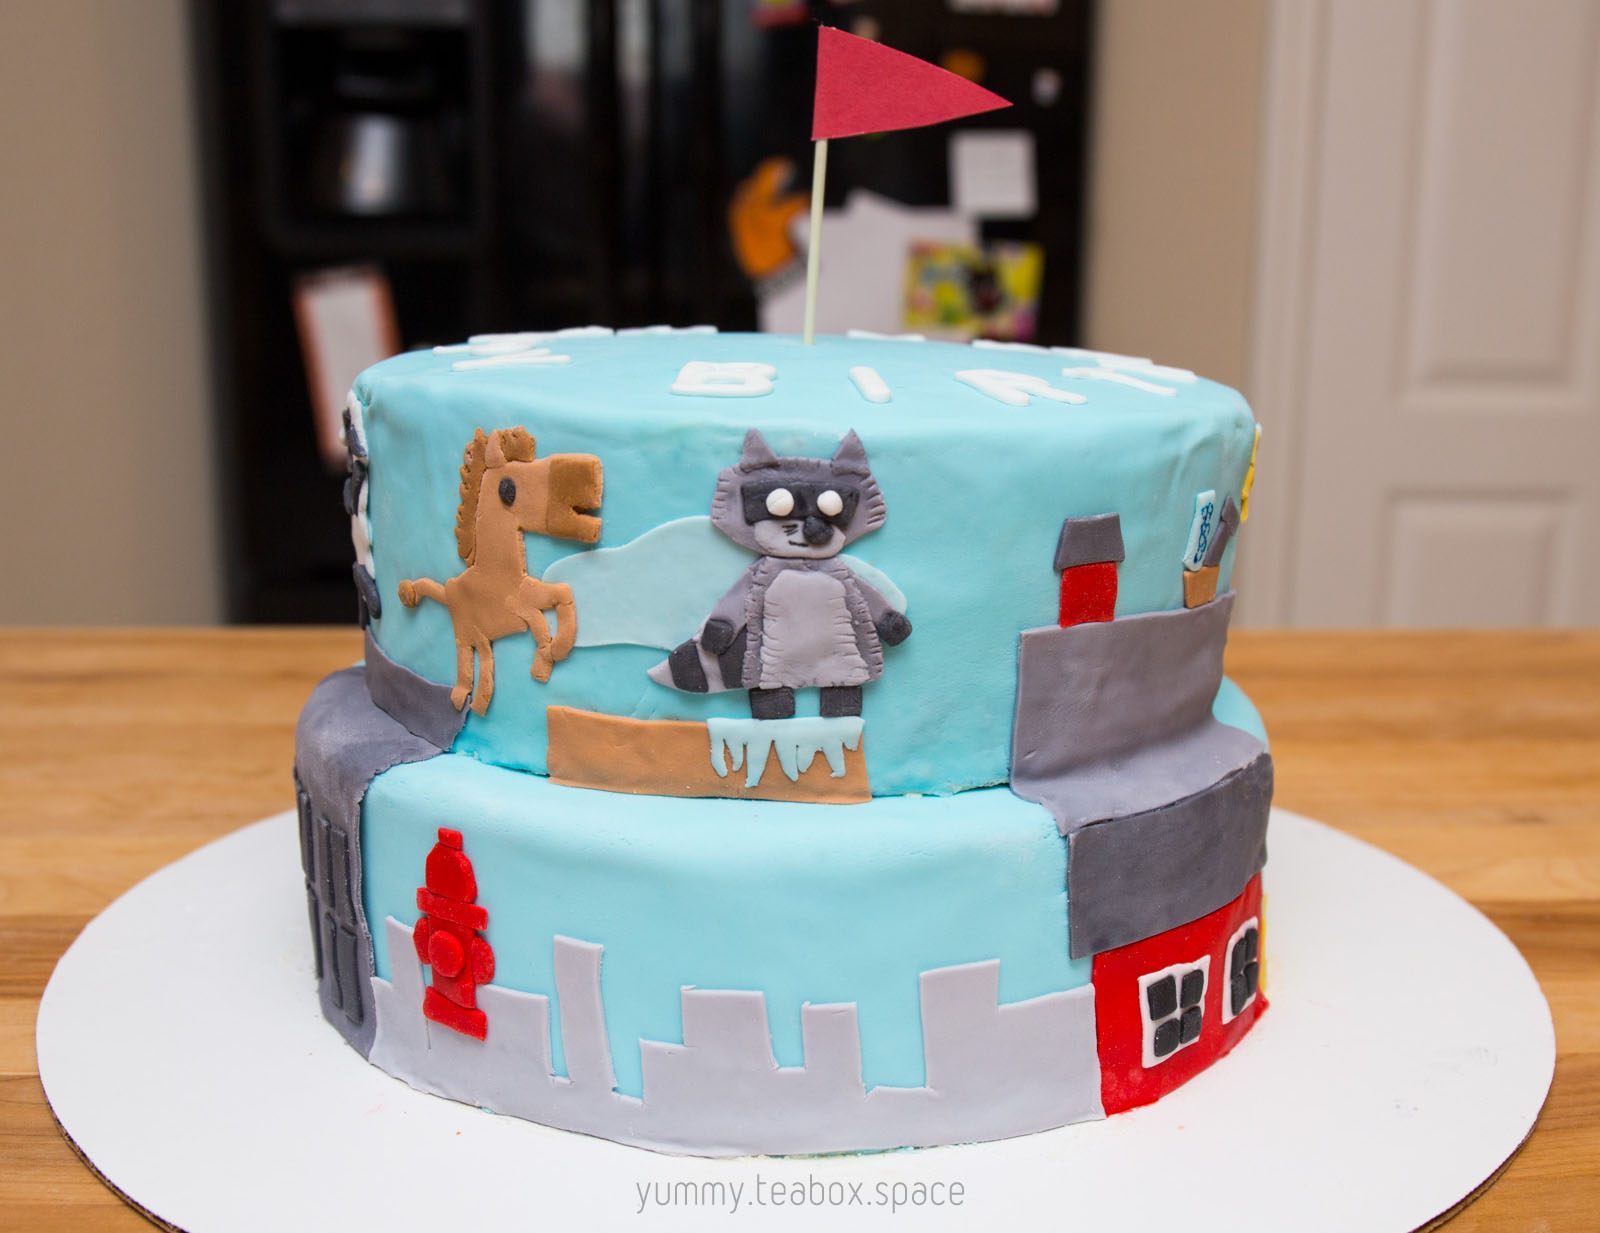 2-tier blue cake with images of horse and raccoon from Ultimate Chicken Horse on the side.